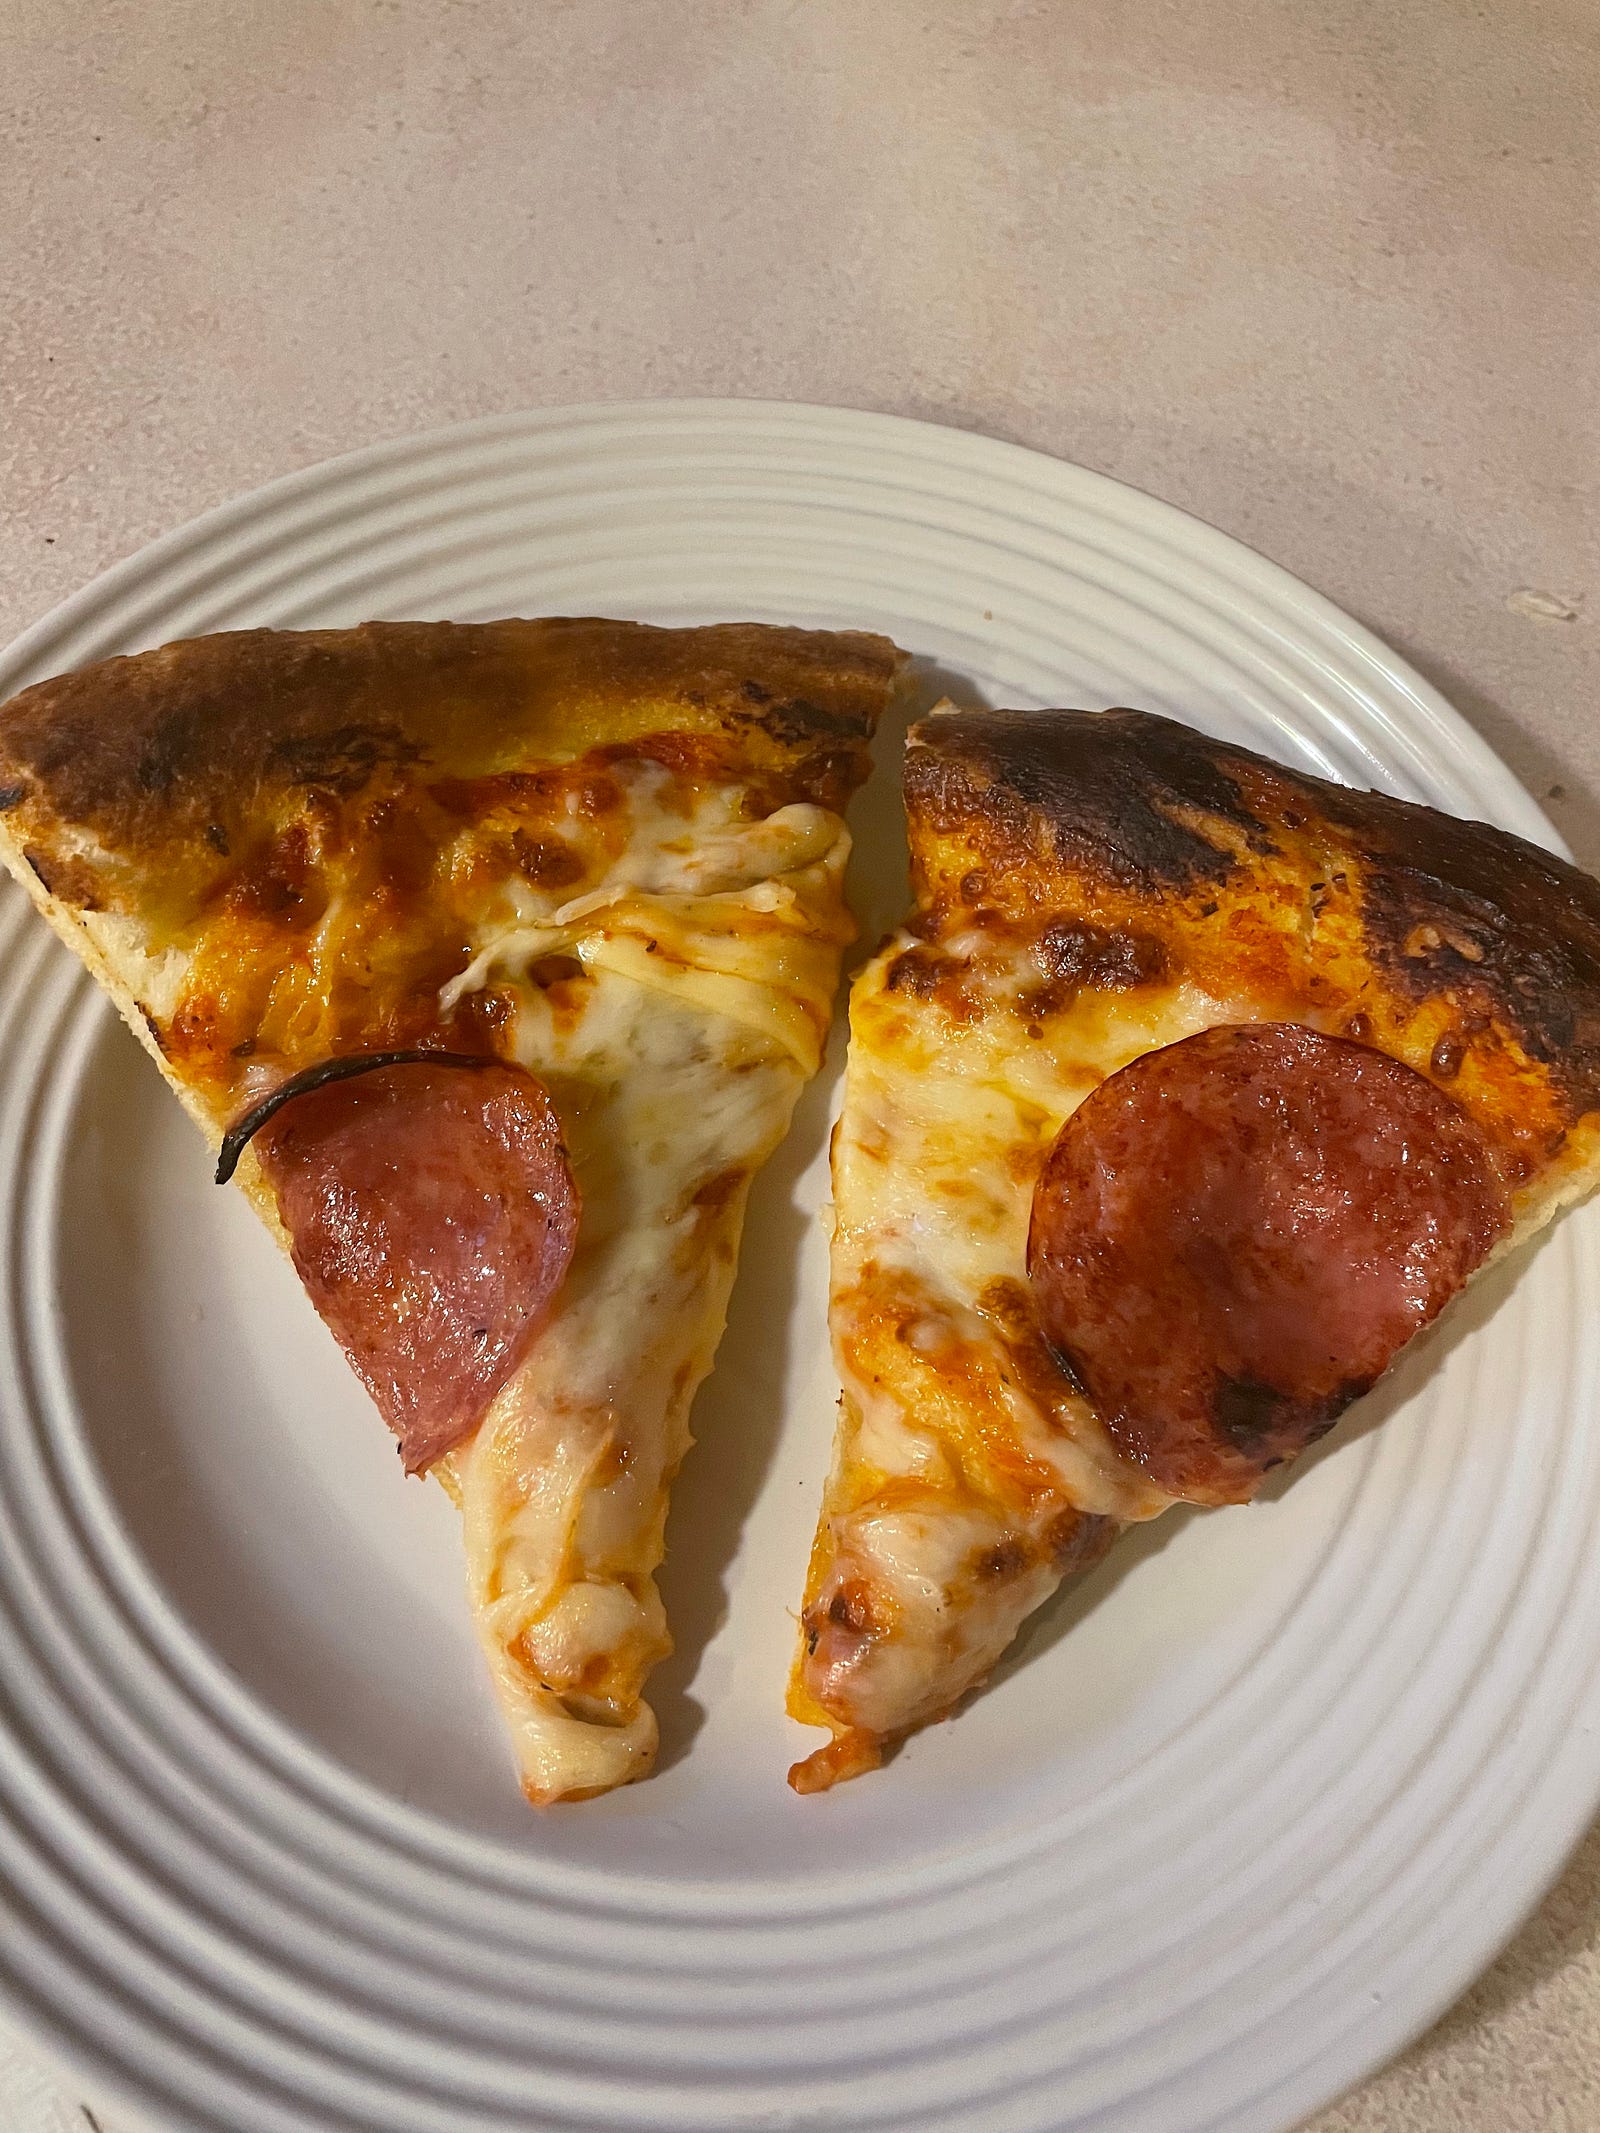 Two pieces of pizza on a plate.